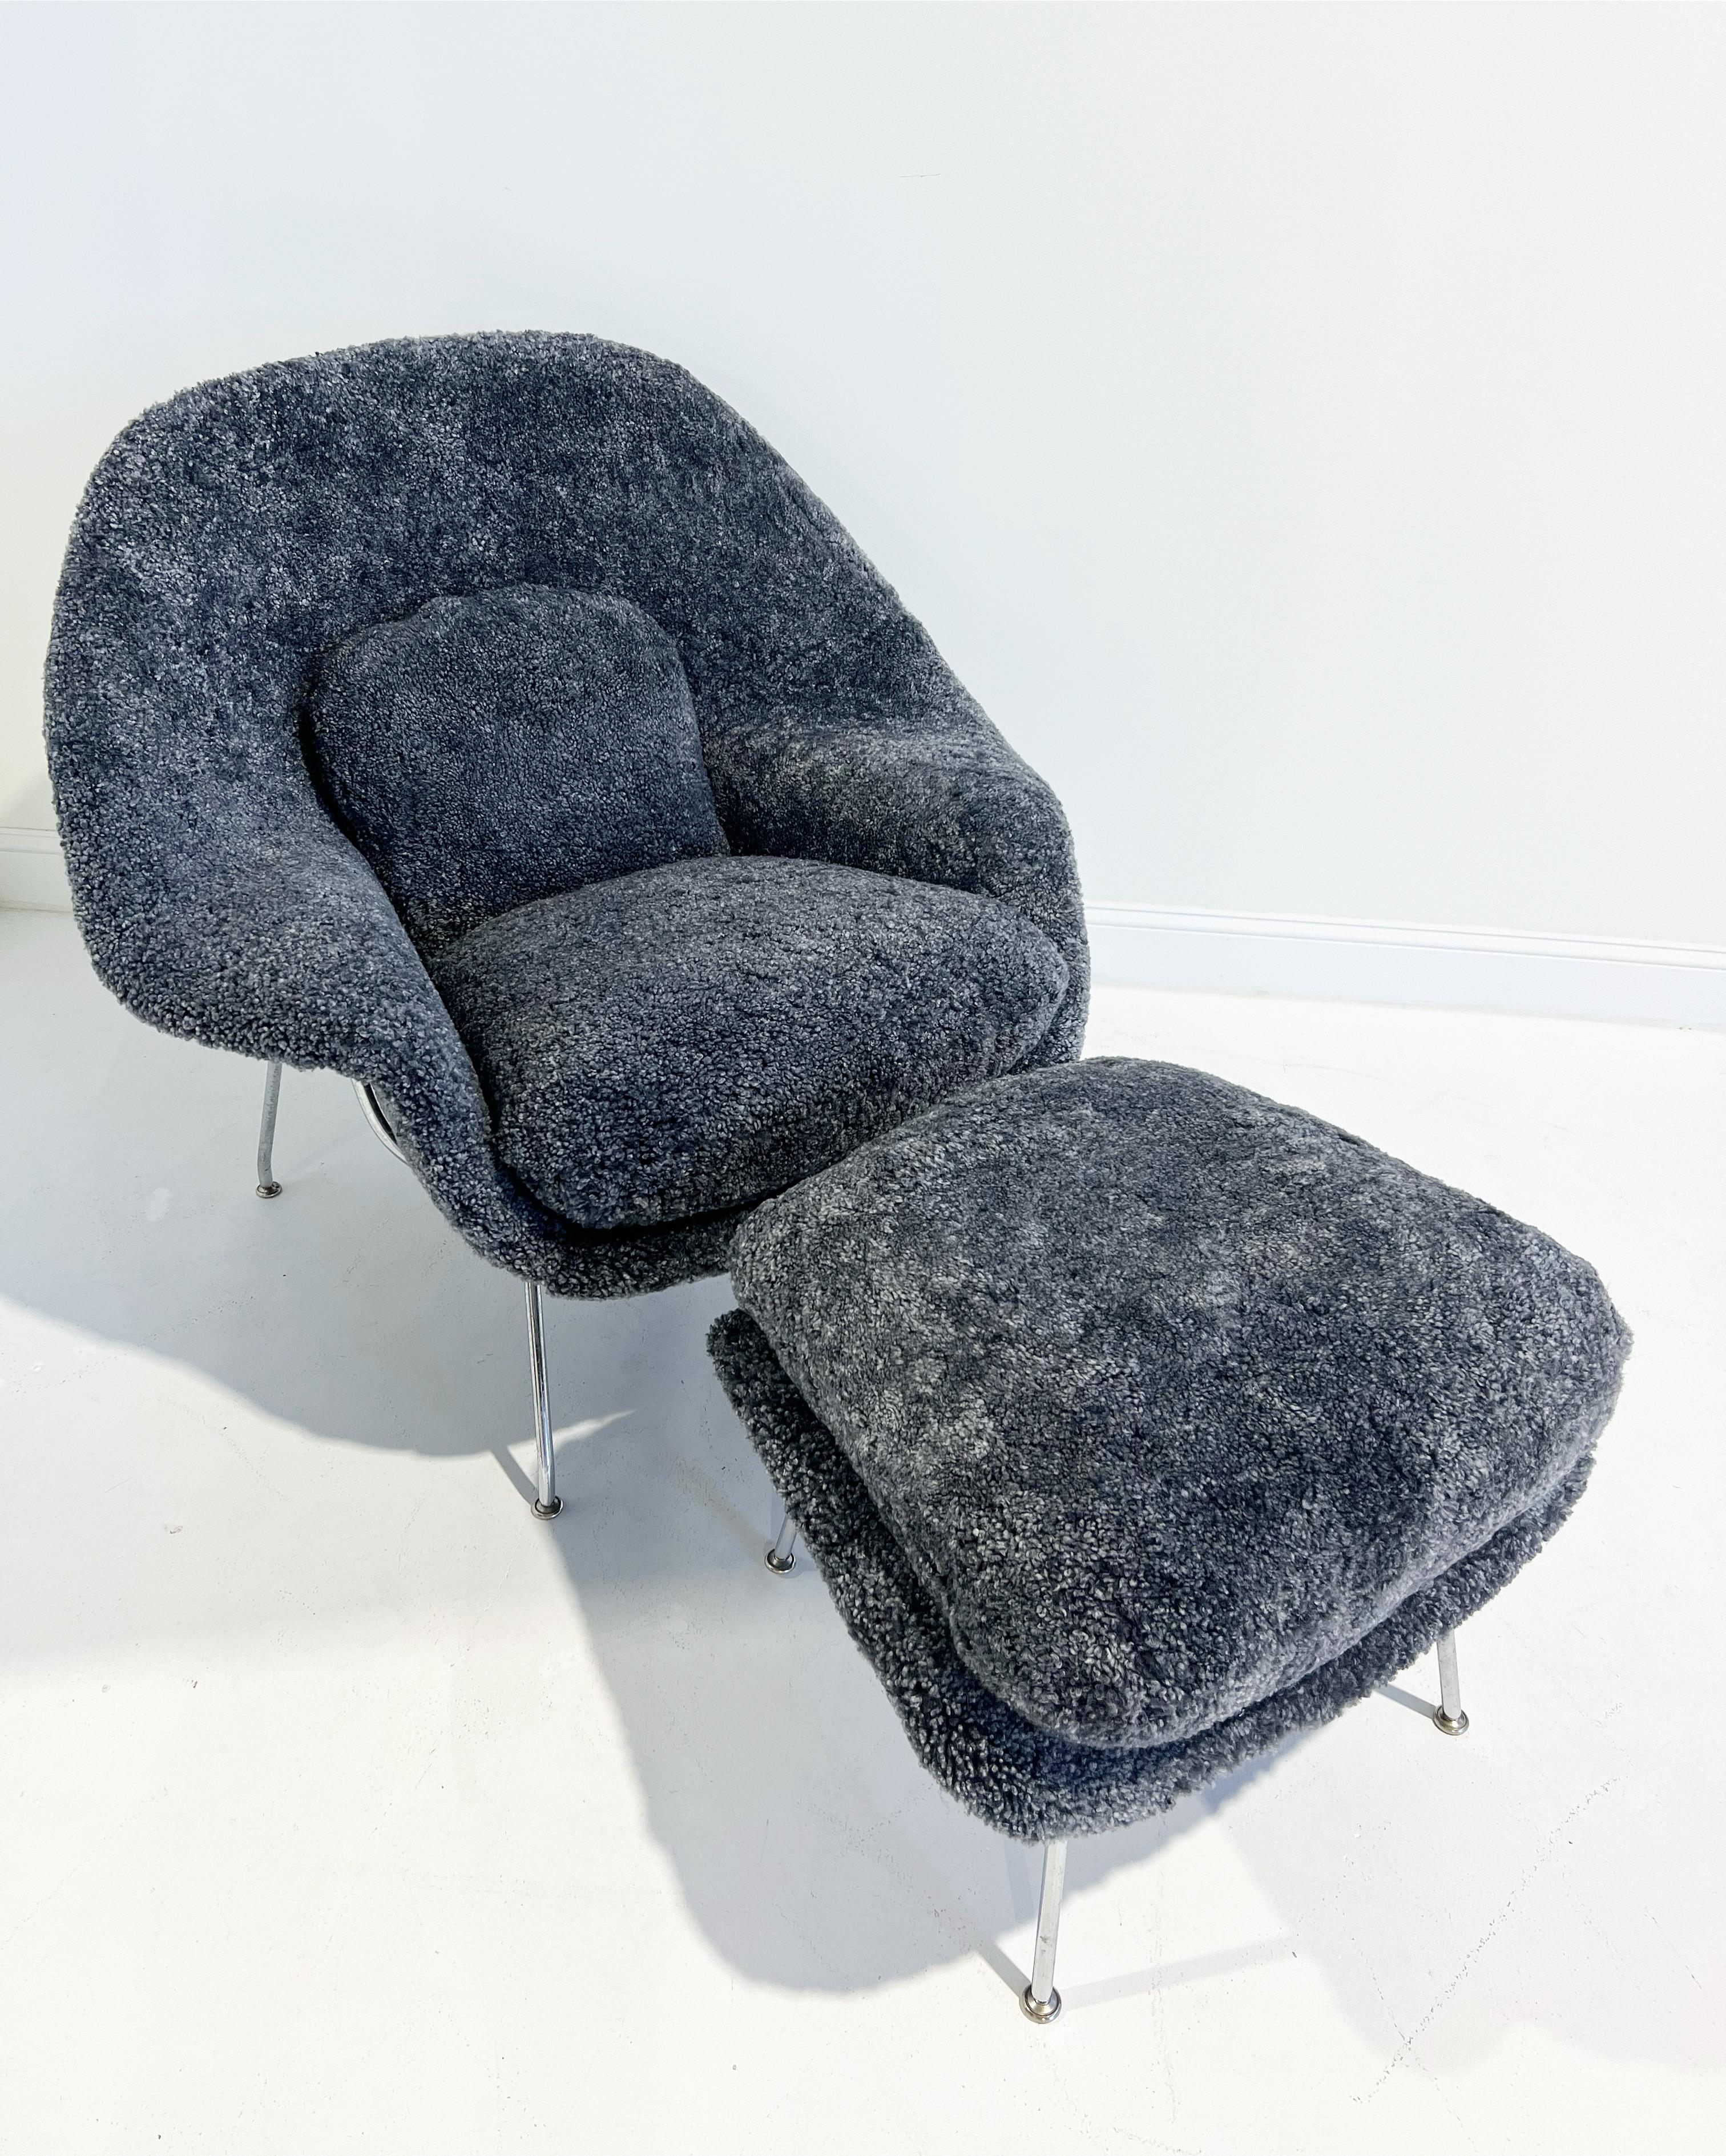 Forsyth Bespoke Eero Saarinen Womb Chair and Ottoman in Shearling For Sale 2